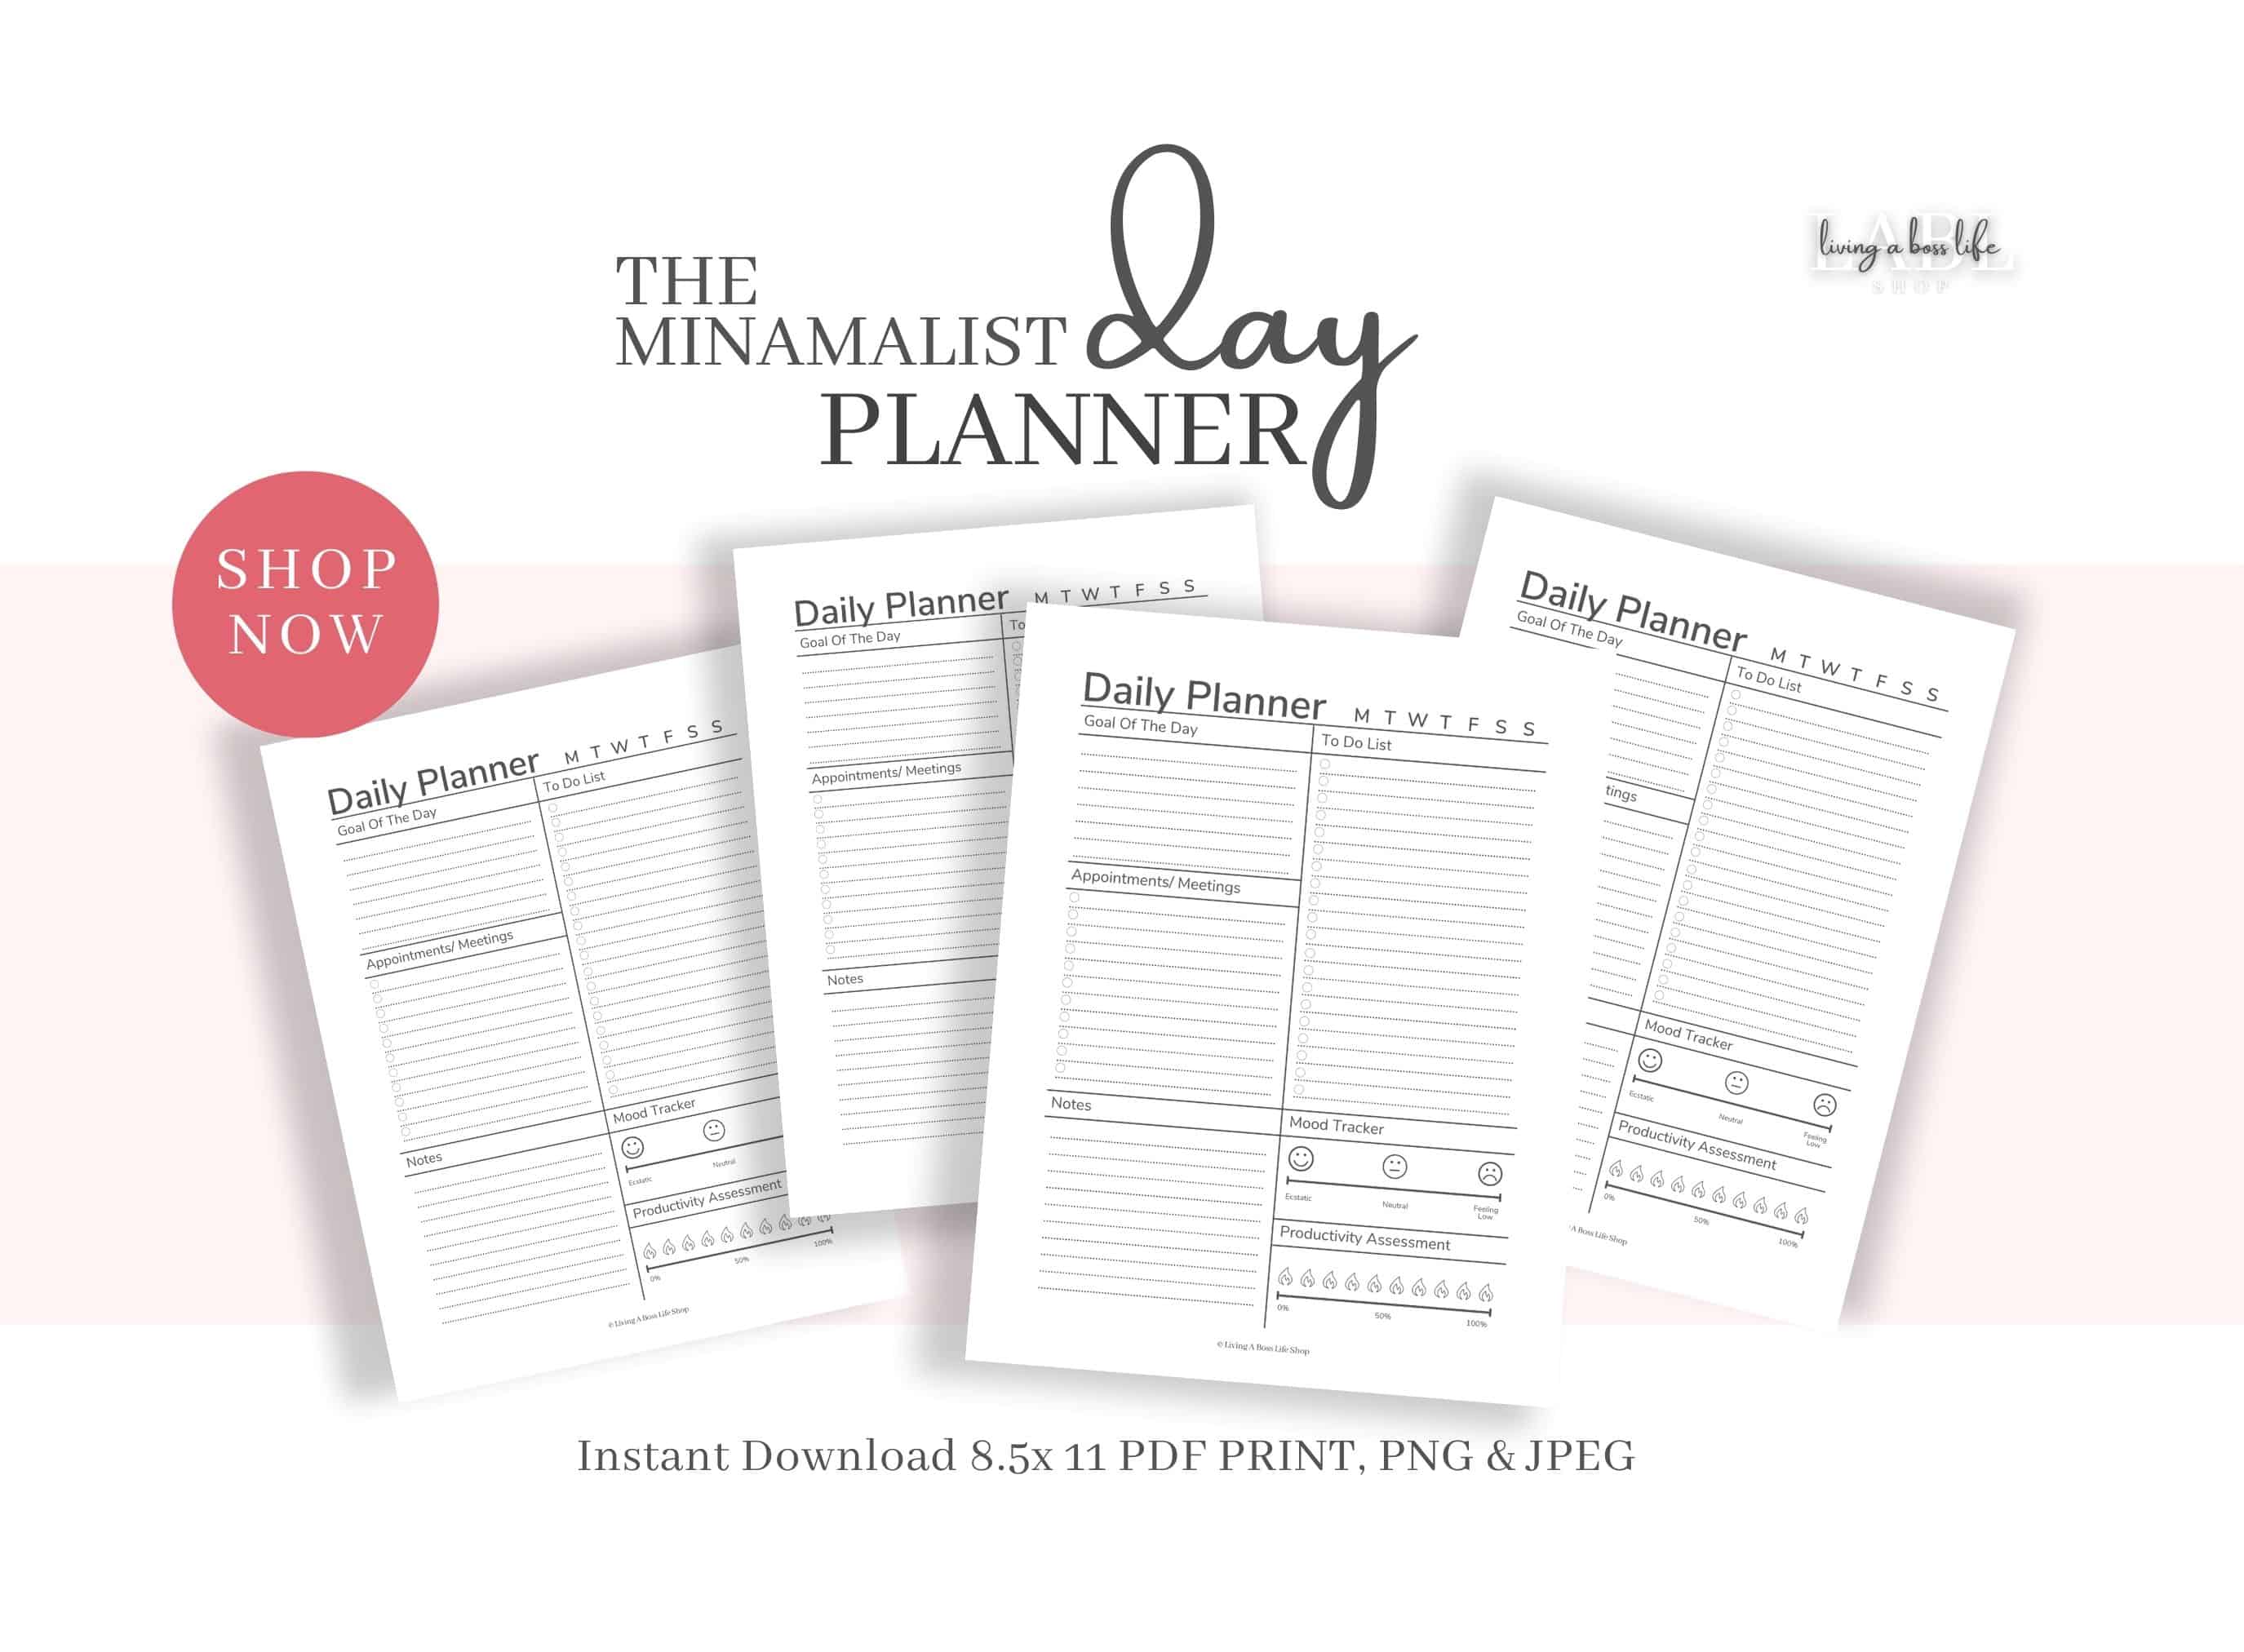 The Minimalist Day Planner Printable Sheet For Productivity, Meetings & Daily To Do's#PrintablePlanner #DailyPlannerPrintable #MinimalistDailyPlanner 